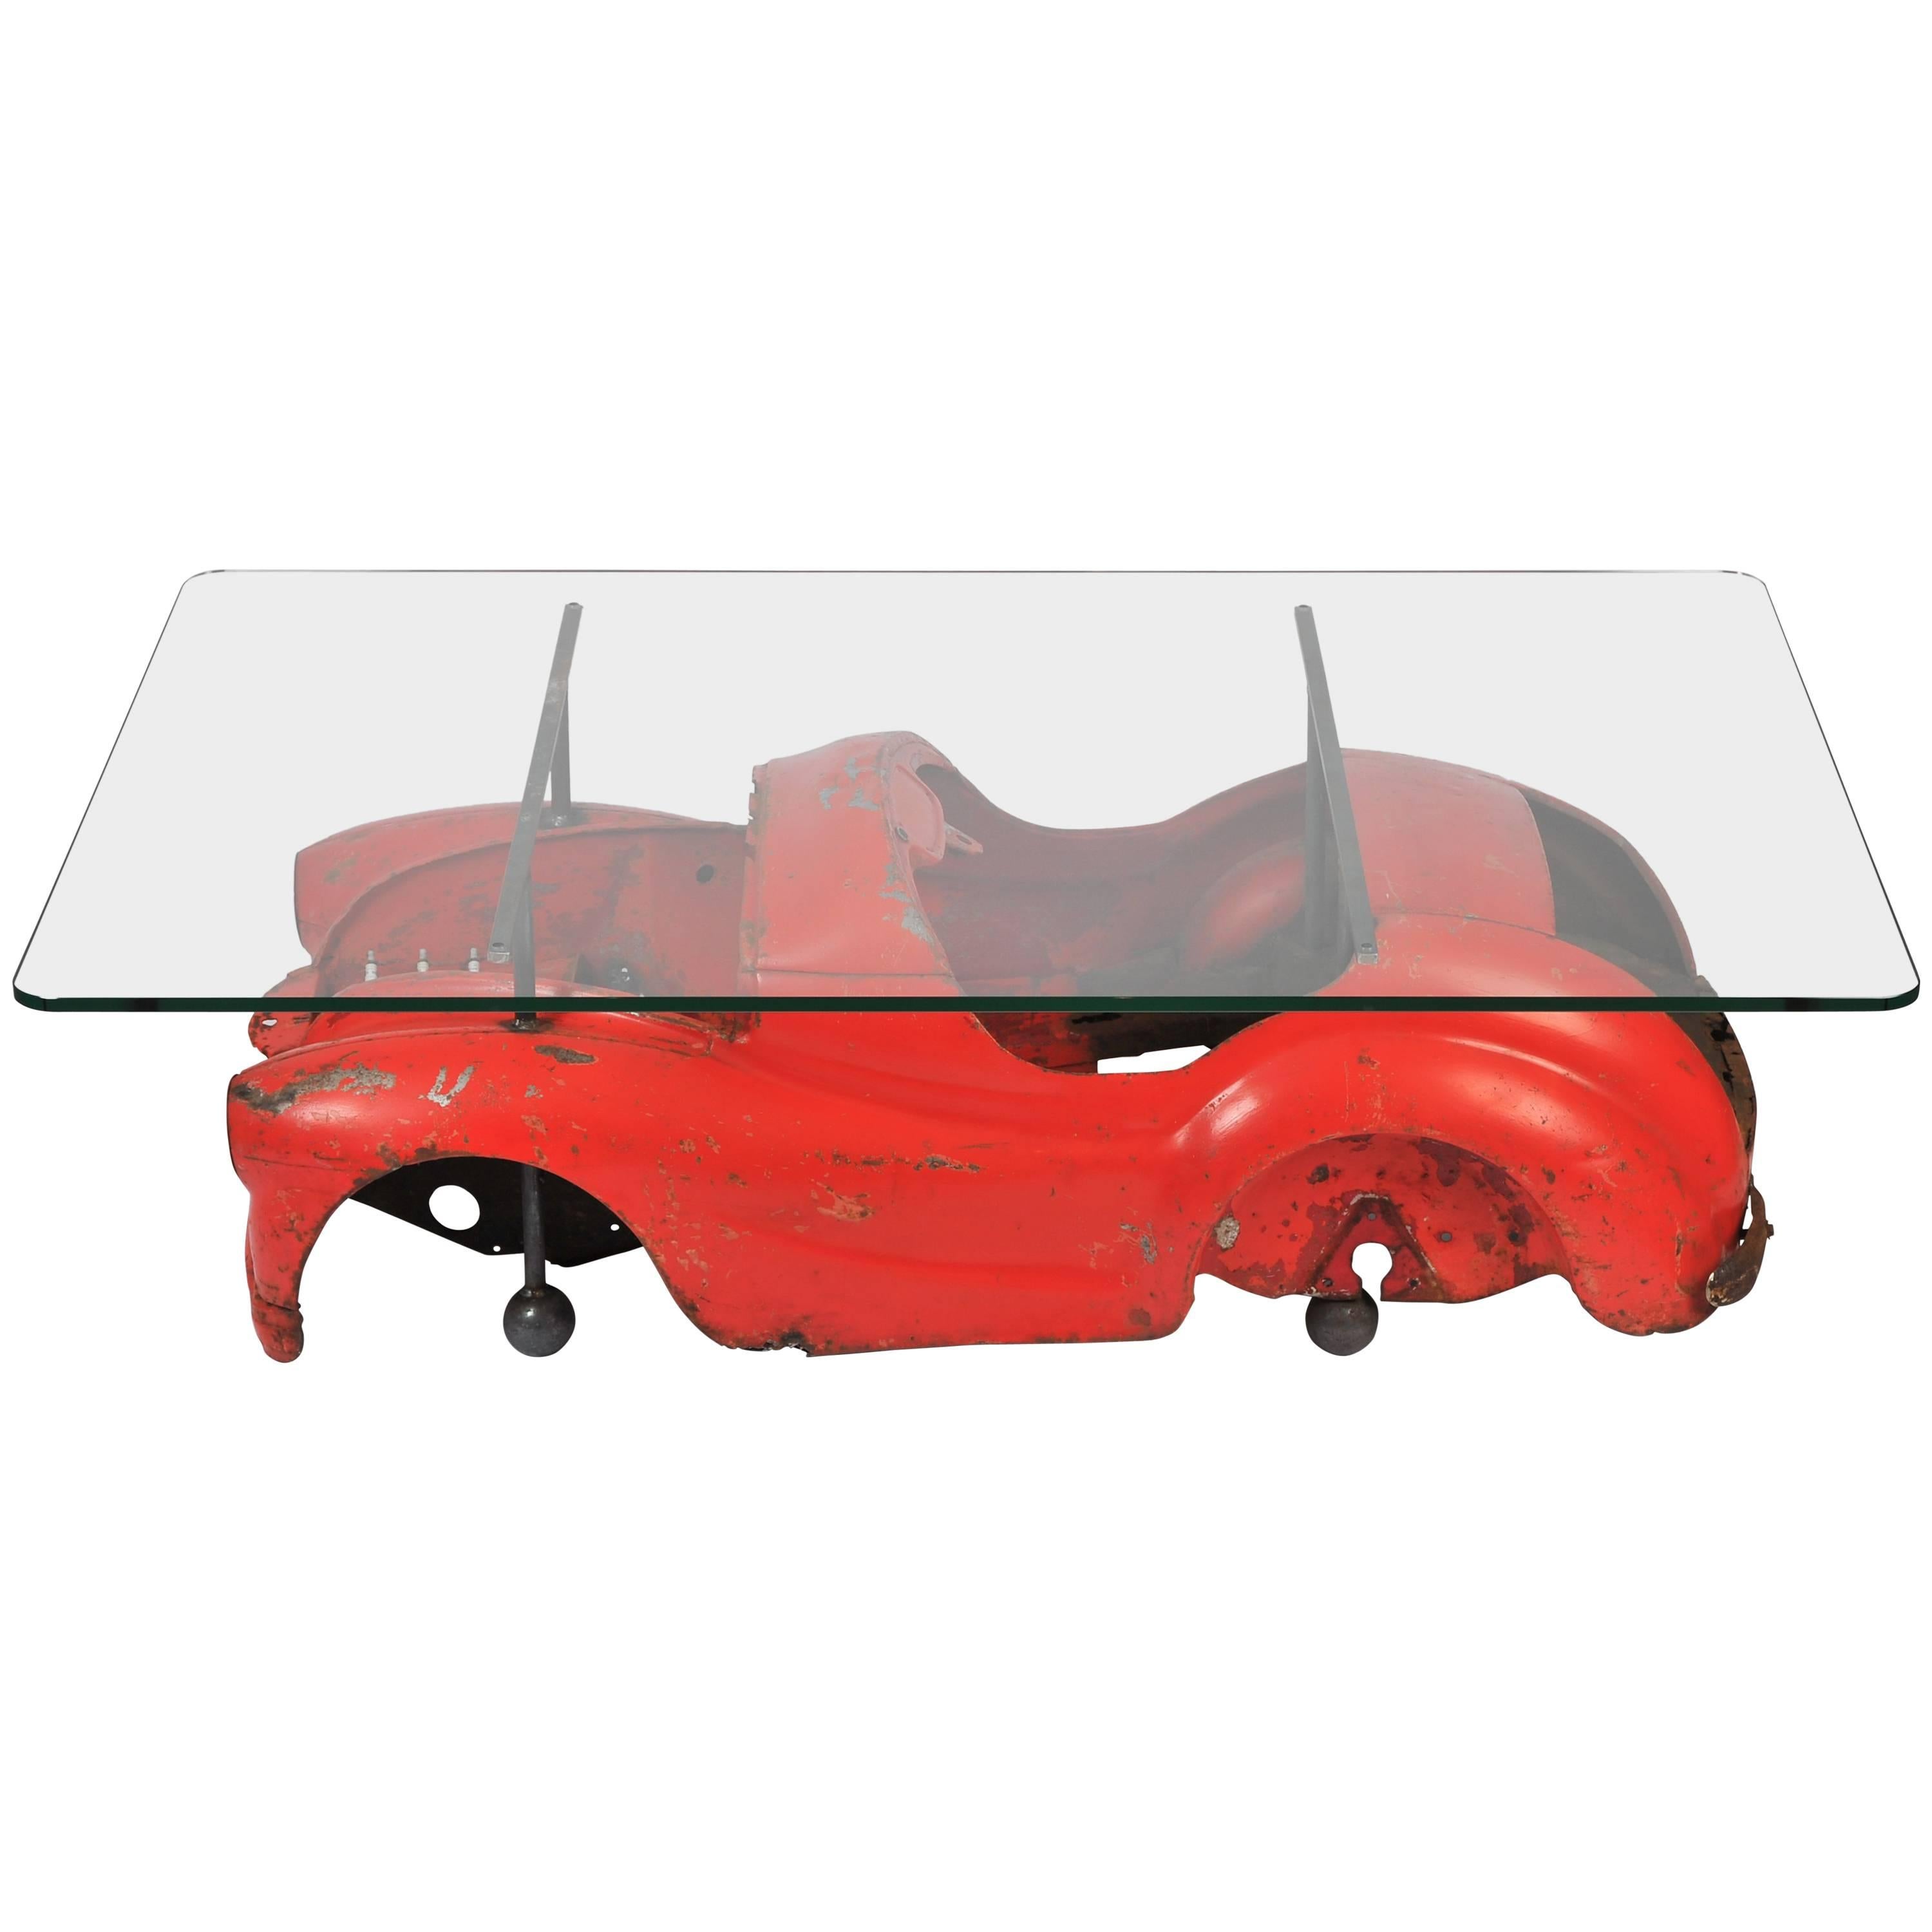 20th Century Industrial Coffee Table with Toy Car Design